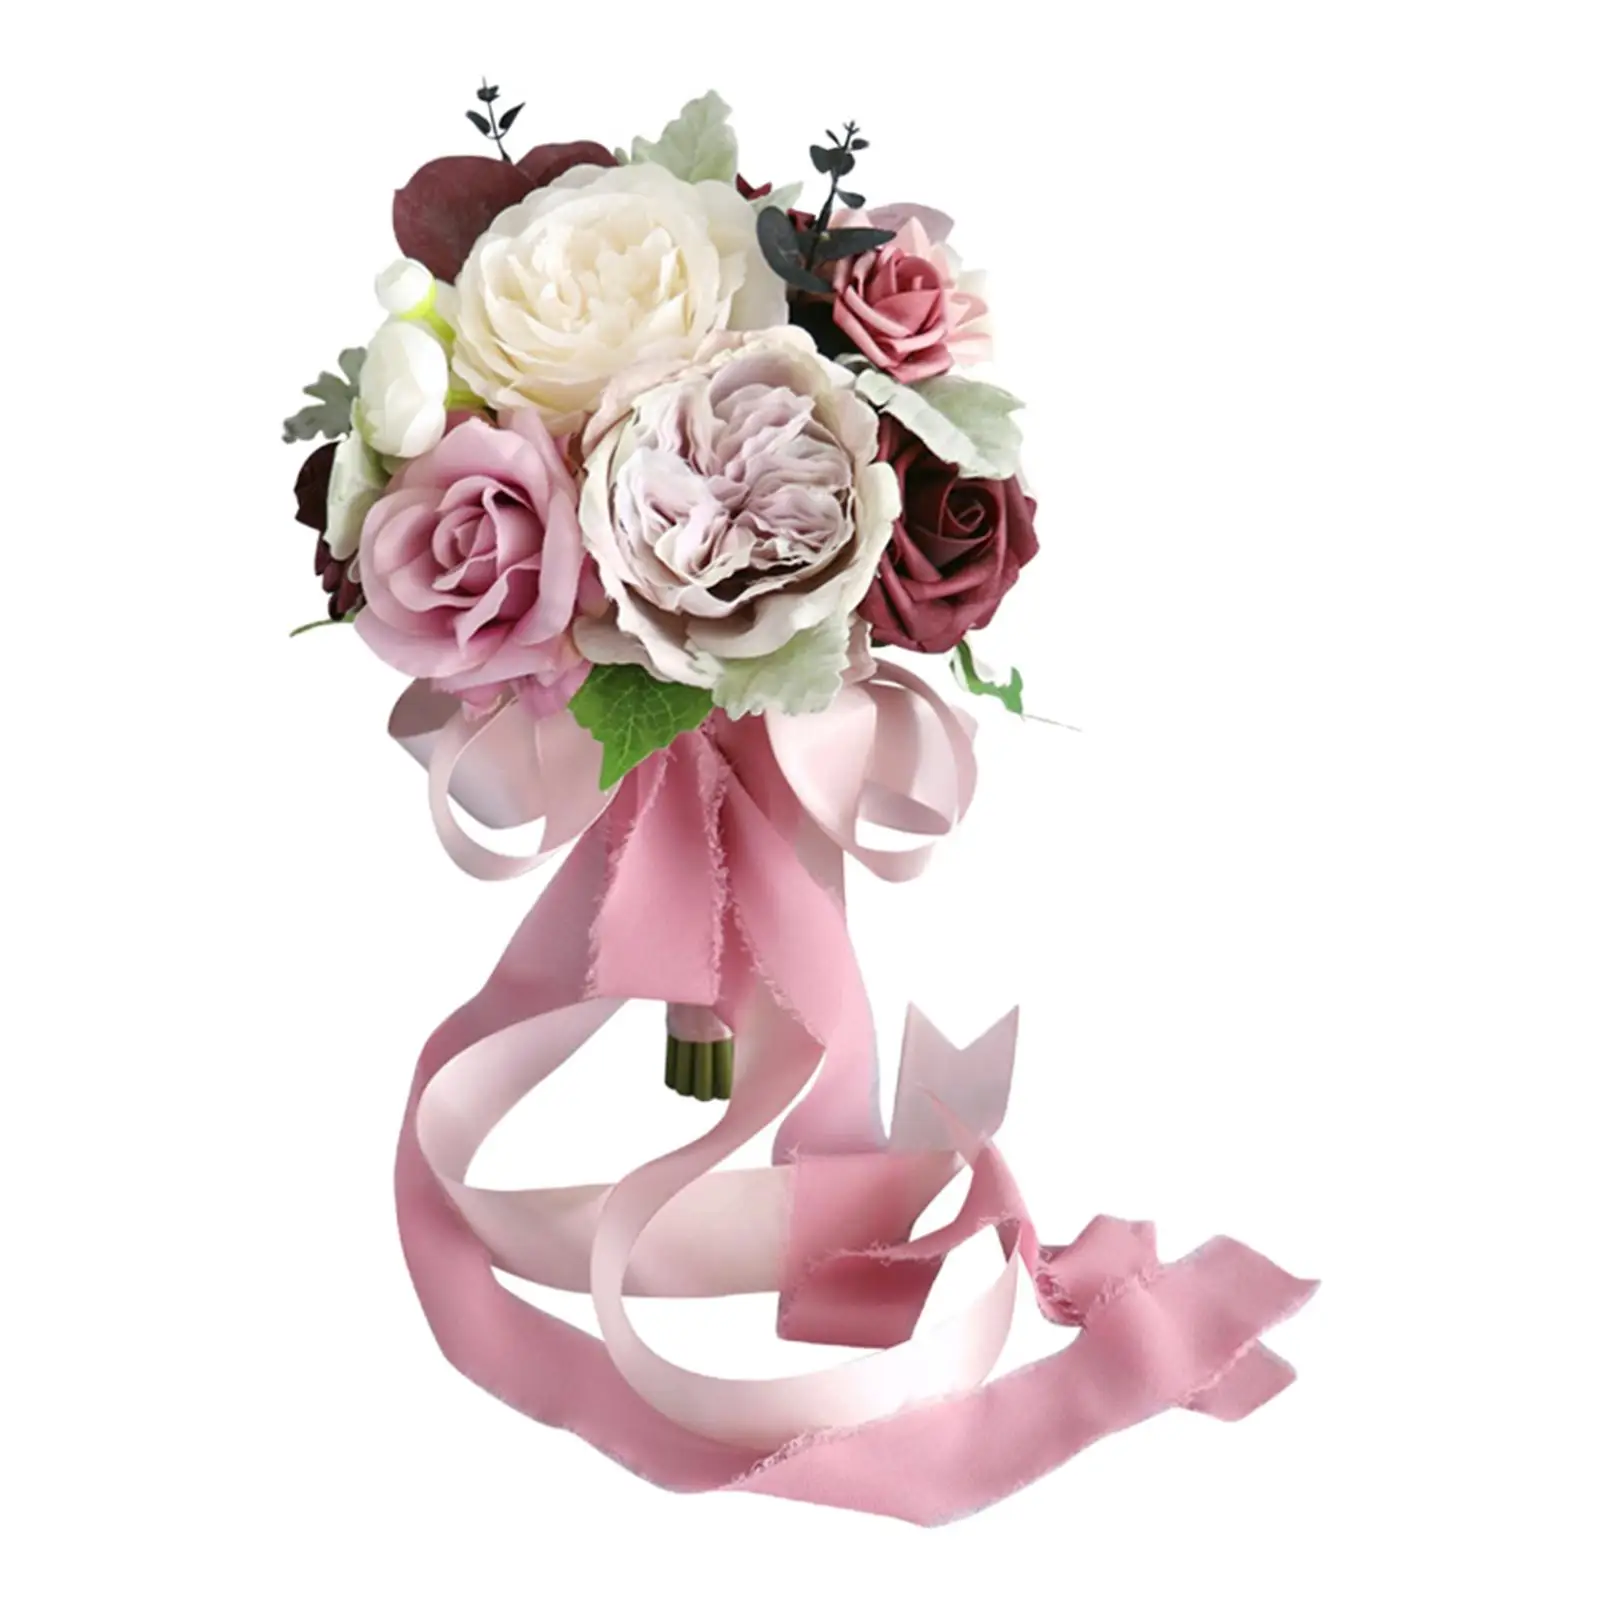 Simulation Bridal Wedding Bouquets Artificial Flowers for Celebrations Photo Props